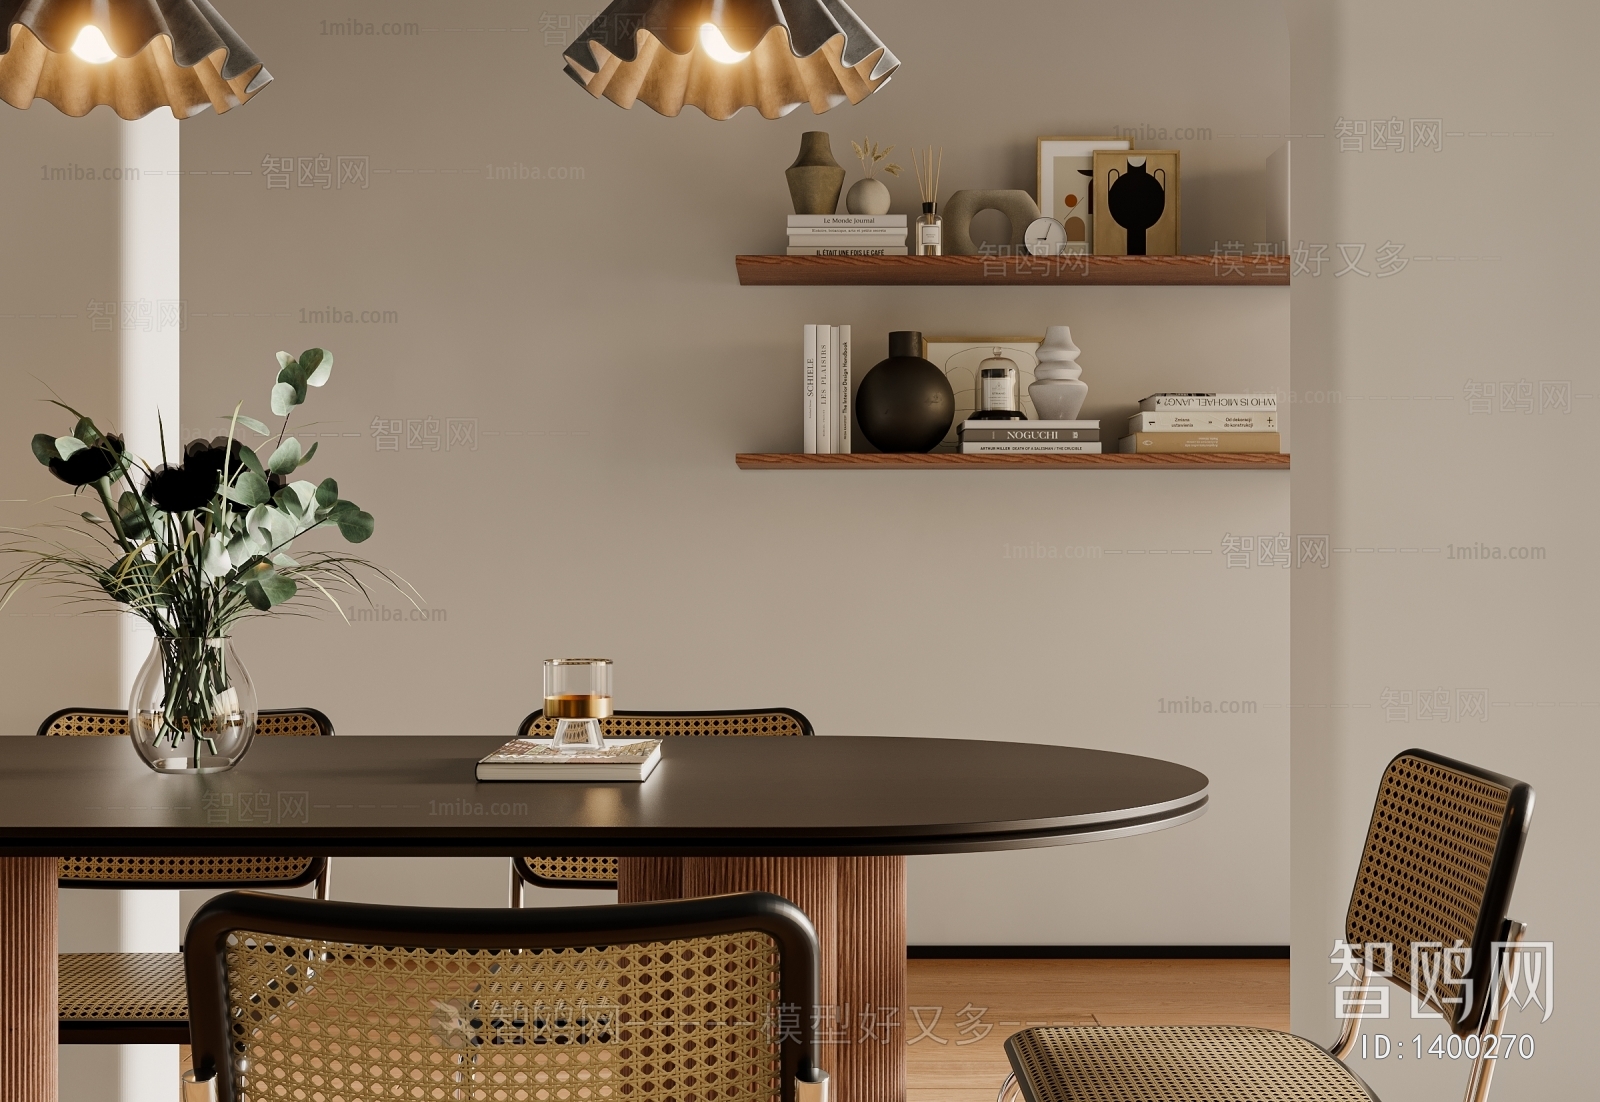 Nordic Style Dining Room